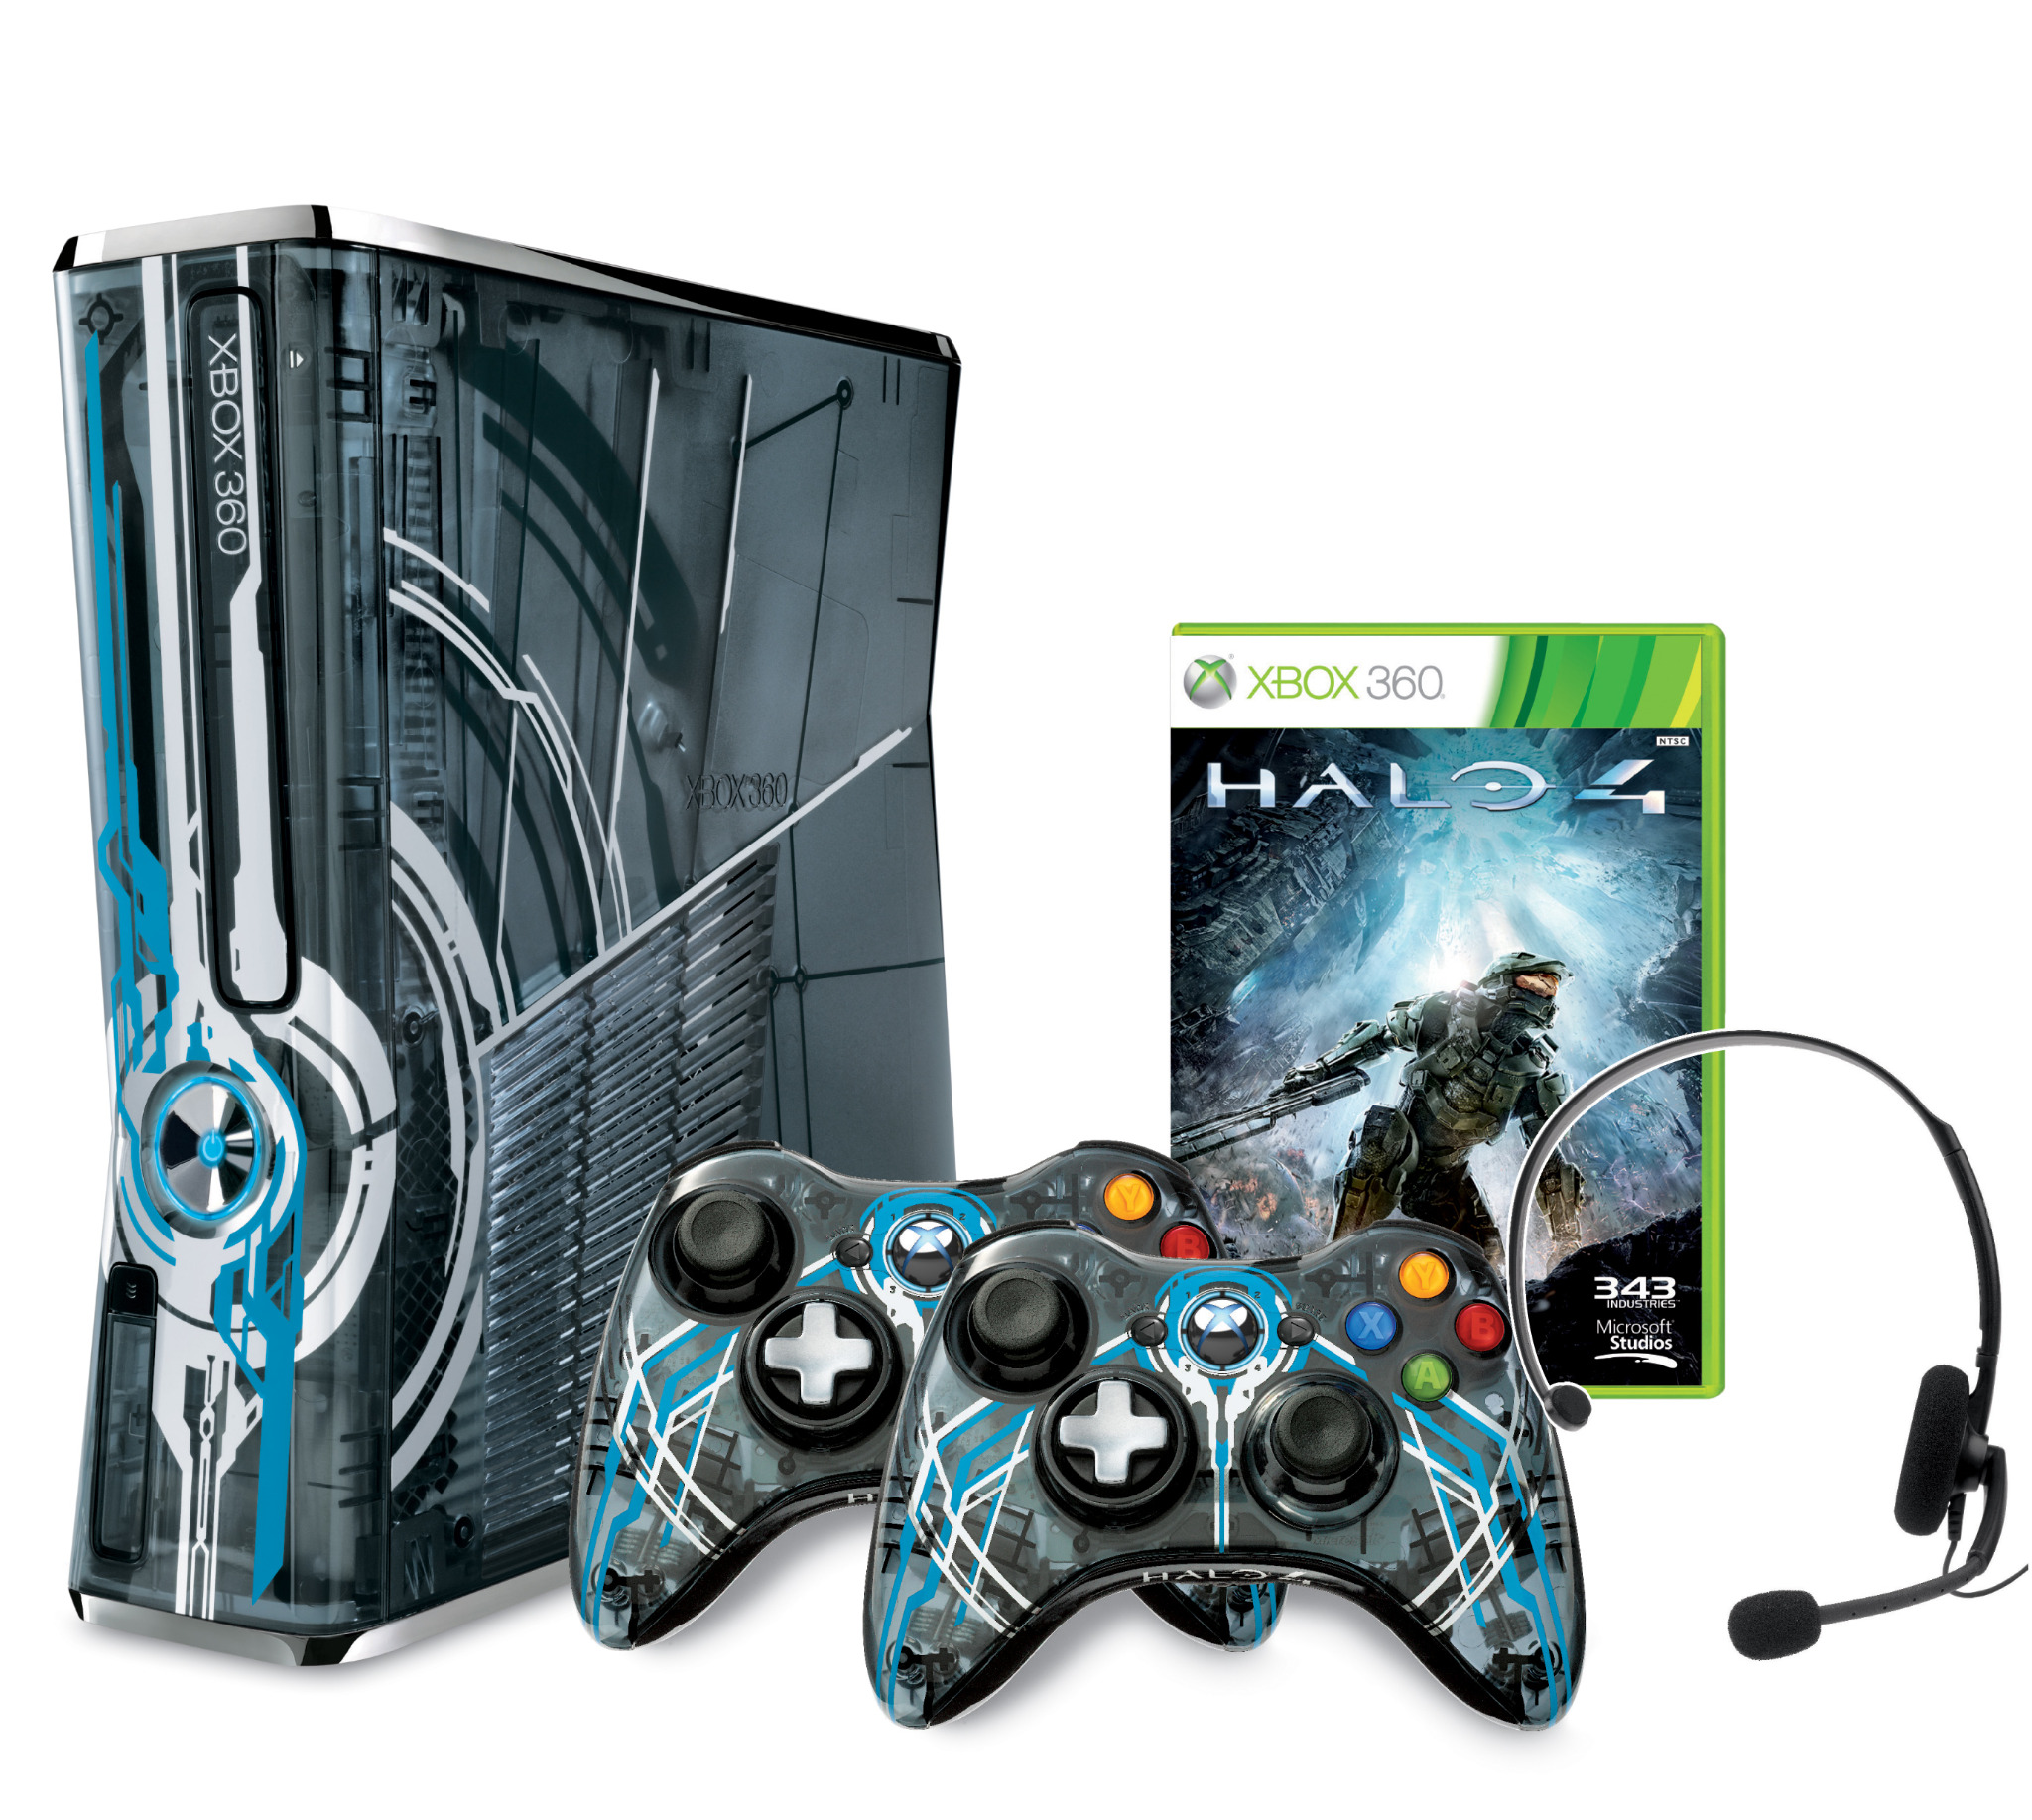 Vervolgen Alvast strak Xbox on Twitter: "Announcing the @Xbox Limited Edition Halo 4 Console, with  320 GB hard drive, 2 controllers, and a copy of #Halo4 (RP)!  http://t.co/xekDAexe" / Twitter